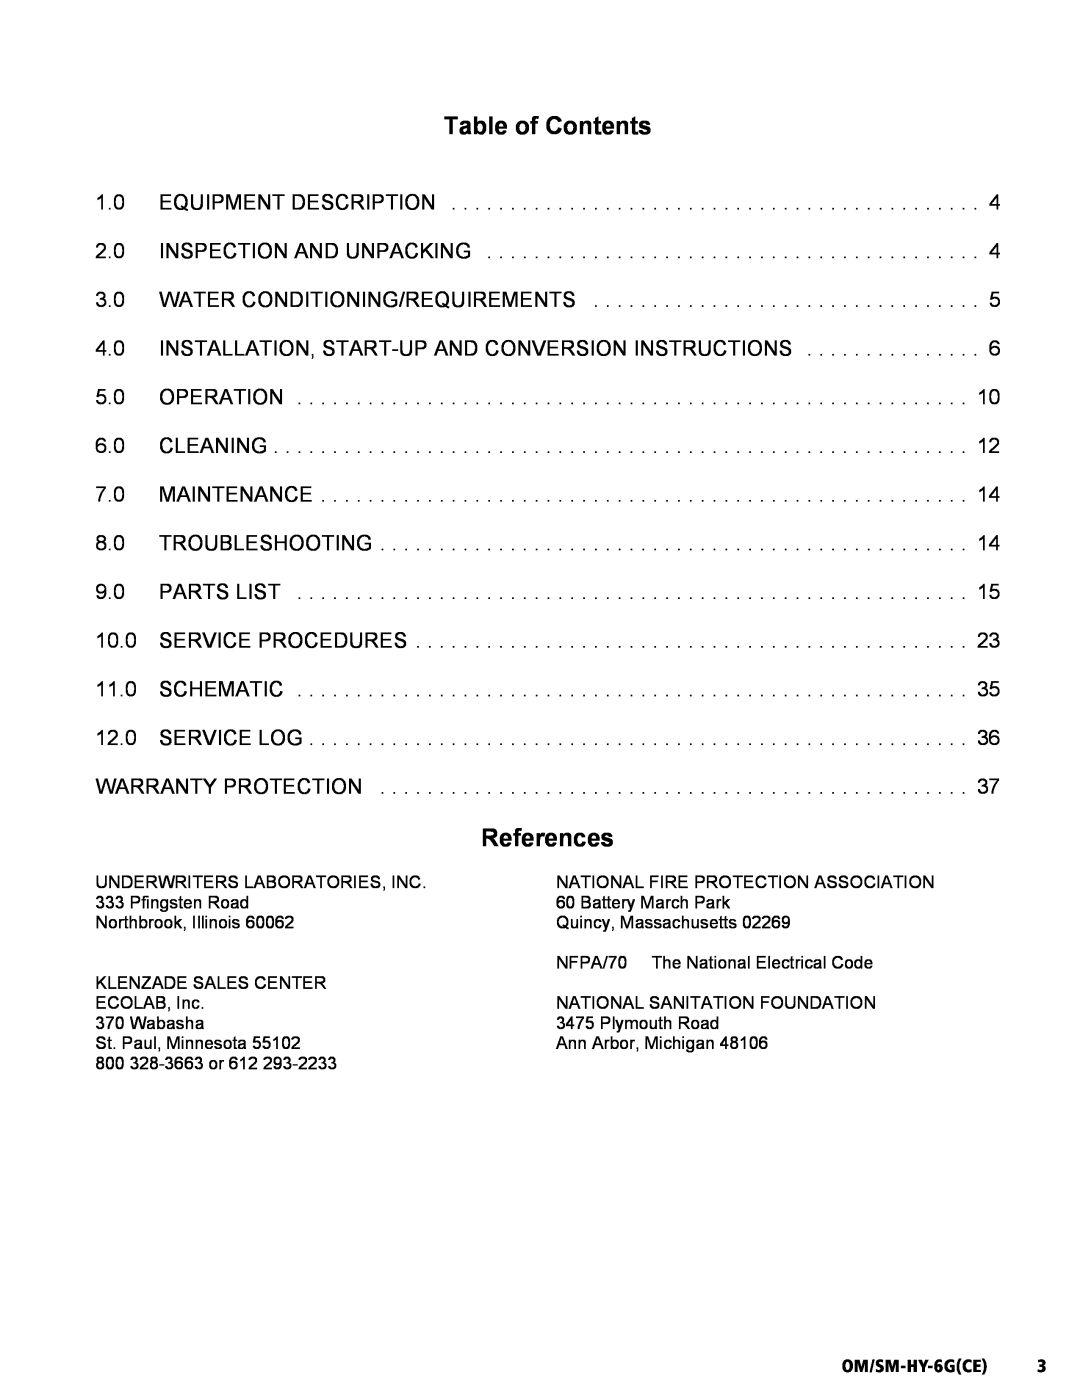 Unified Brands HY-6G(CE) service manual Table of Contents, References, OM/SM-HY-6GCE  